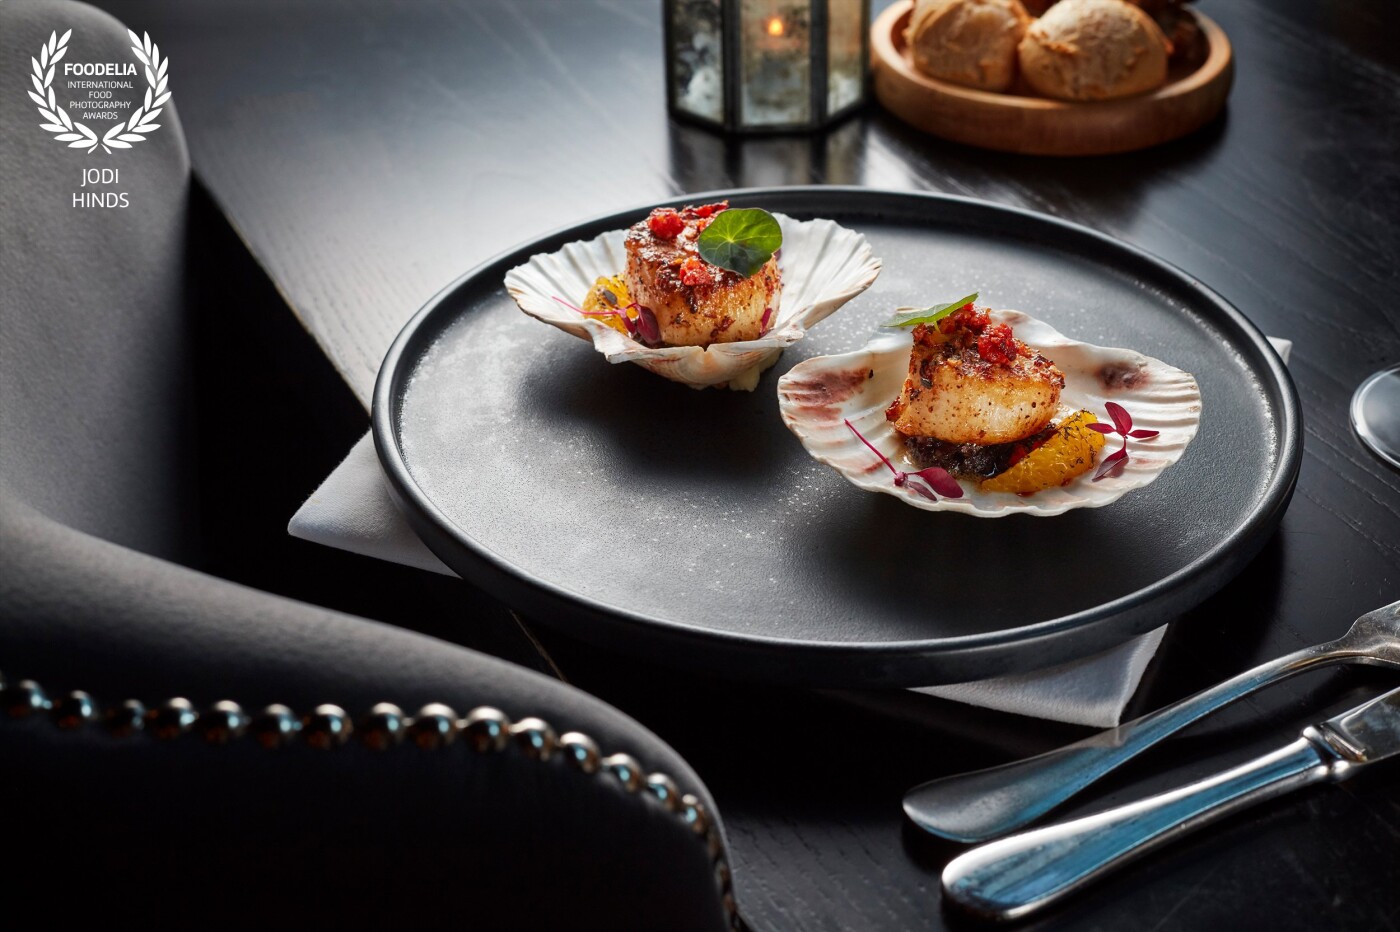 New menu shot at Gaucho - the Argentine steak restaurant group in the UK and Dubai. These are the delicious seared scallops, served in the shell with blood pudding, spiced orange butter, charred orange, chorizo crumble and nasturtium.<br />
Restaurant: @gauchogroup<br />
Owner: @martinwilliams32<br />
Photographer: @jodihindsphoto